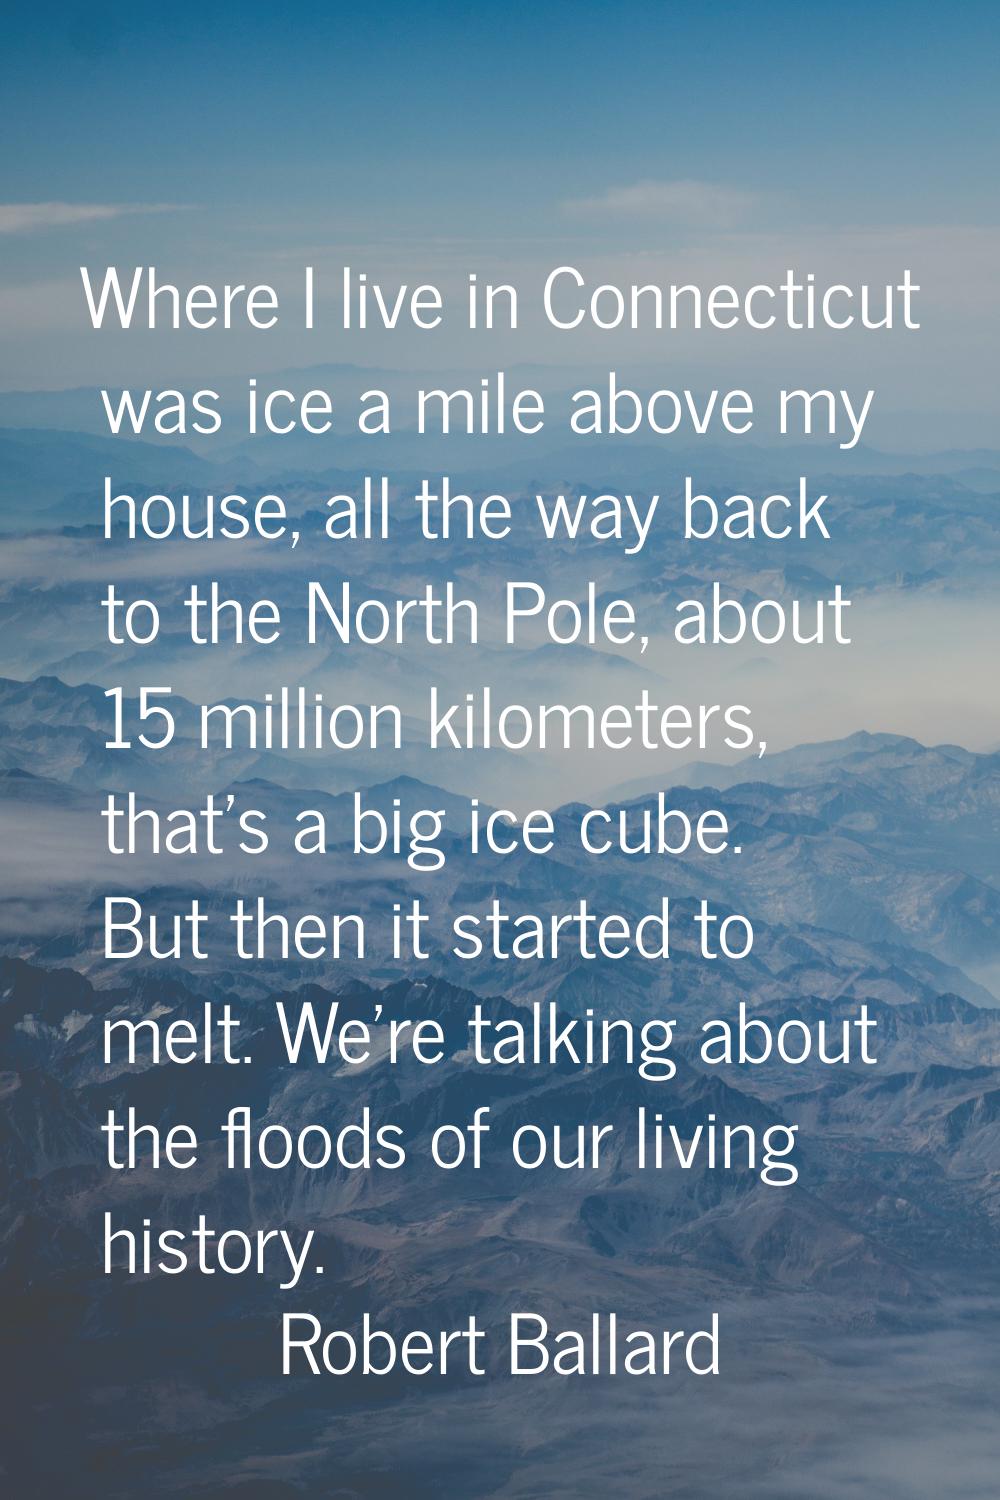 Where I live in Connecticut was ice a mile above my house, all the way back to the North Pole, abou